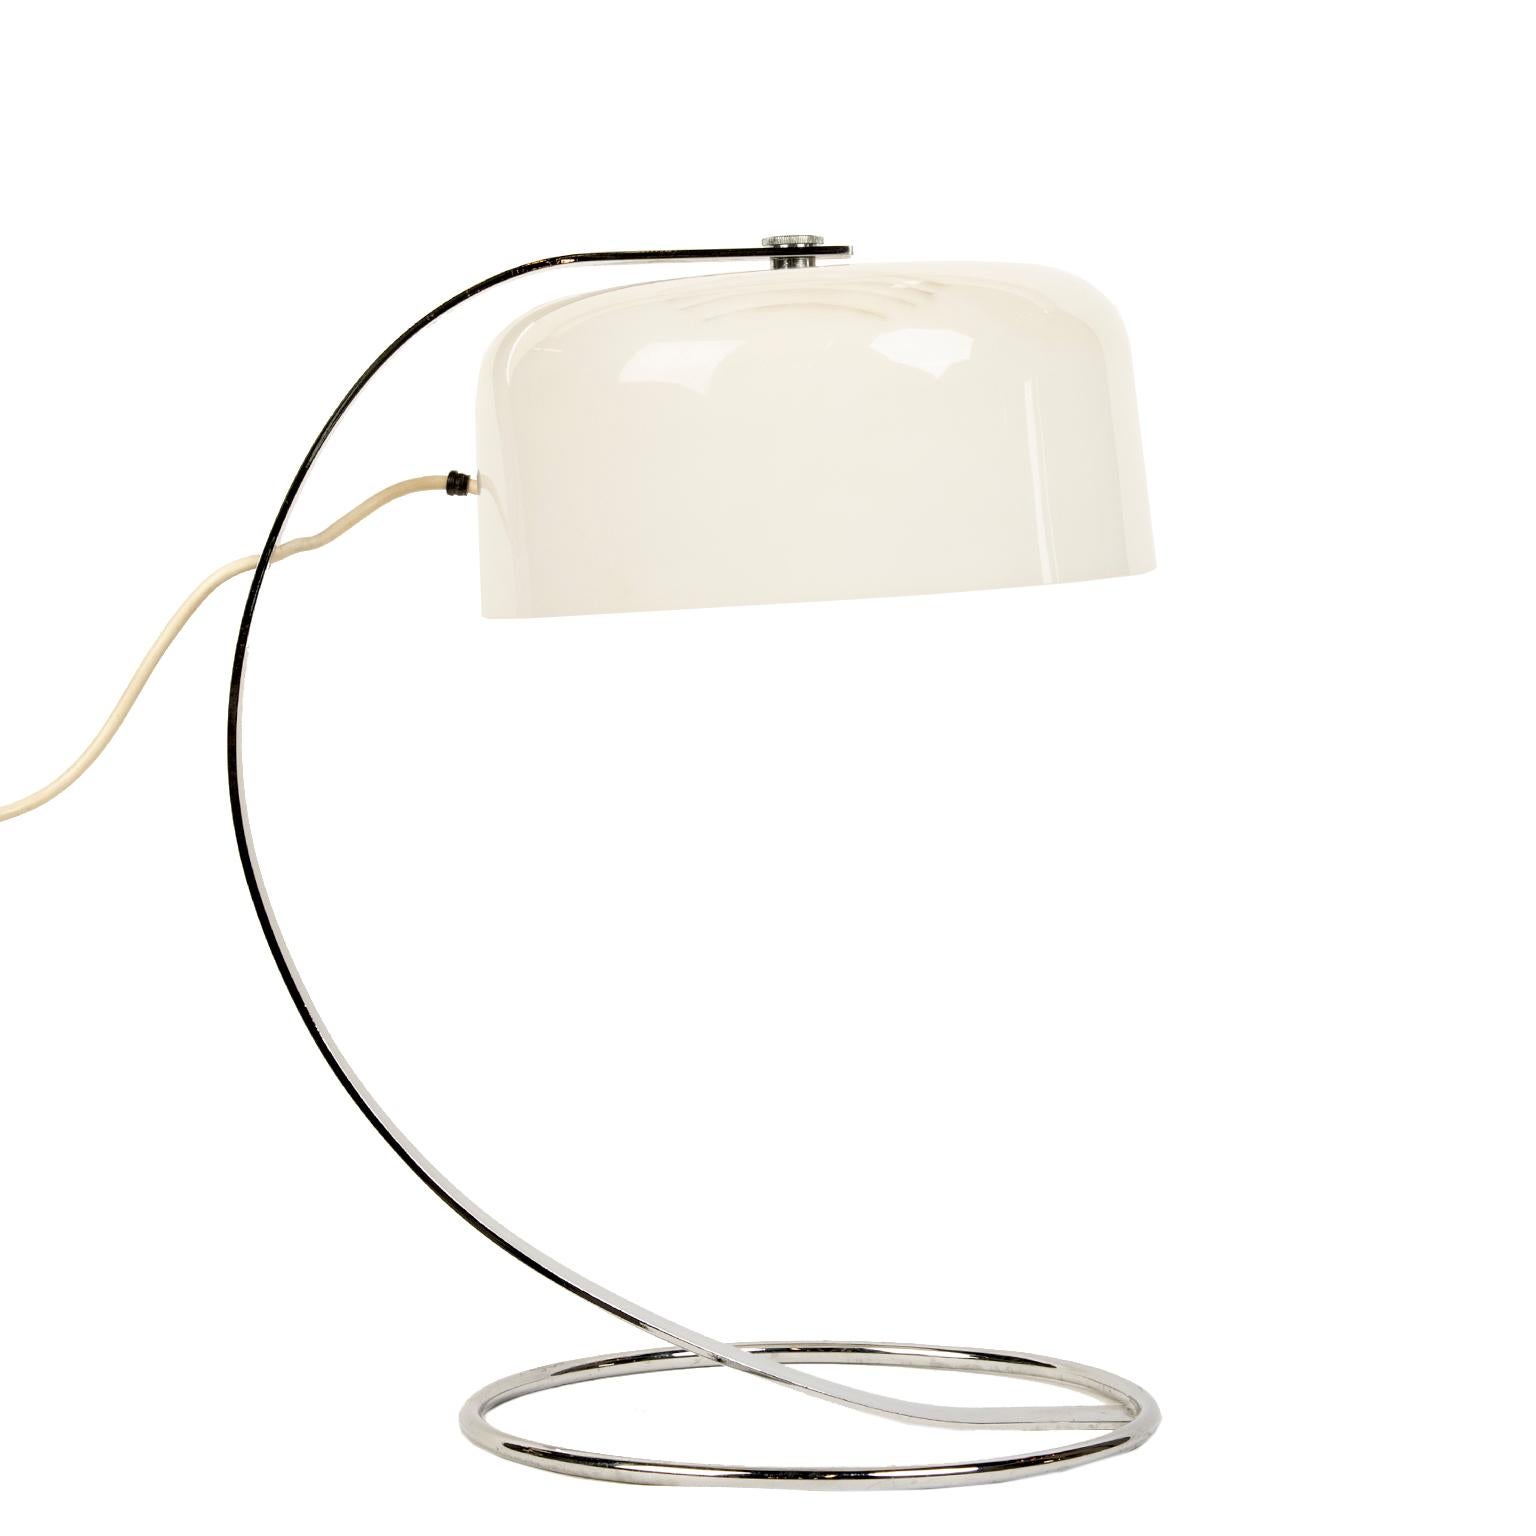 A cool Modernist desk lamp with opaque acrylic white shade and chrome metal base by RAAK, Amsterdam.